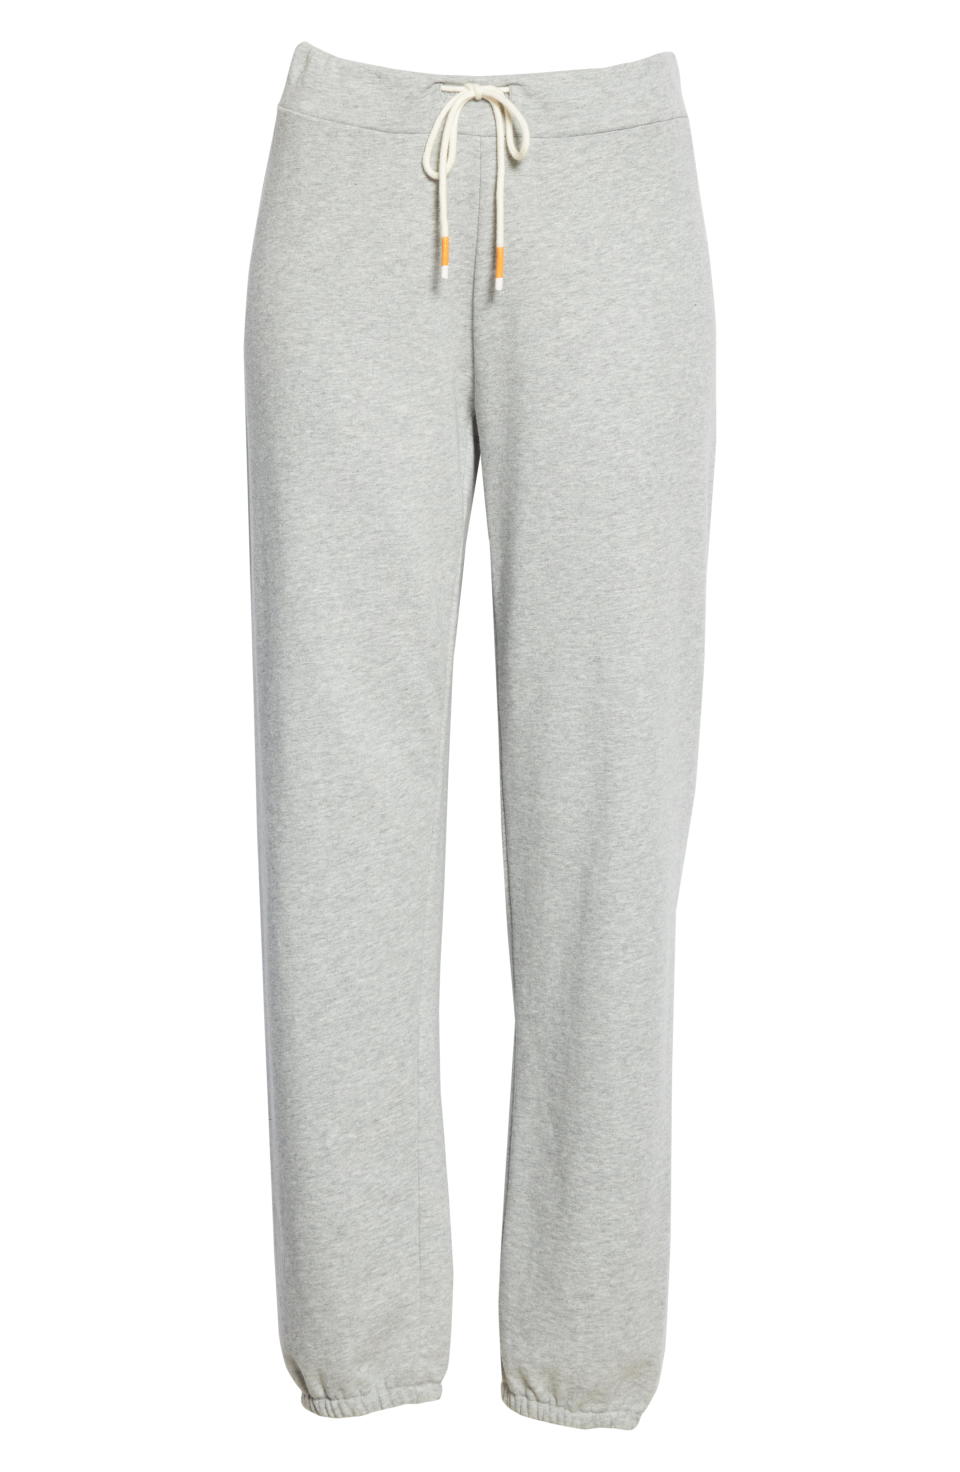 2) French Terry Sweatpants